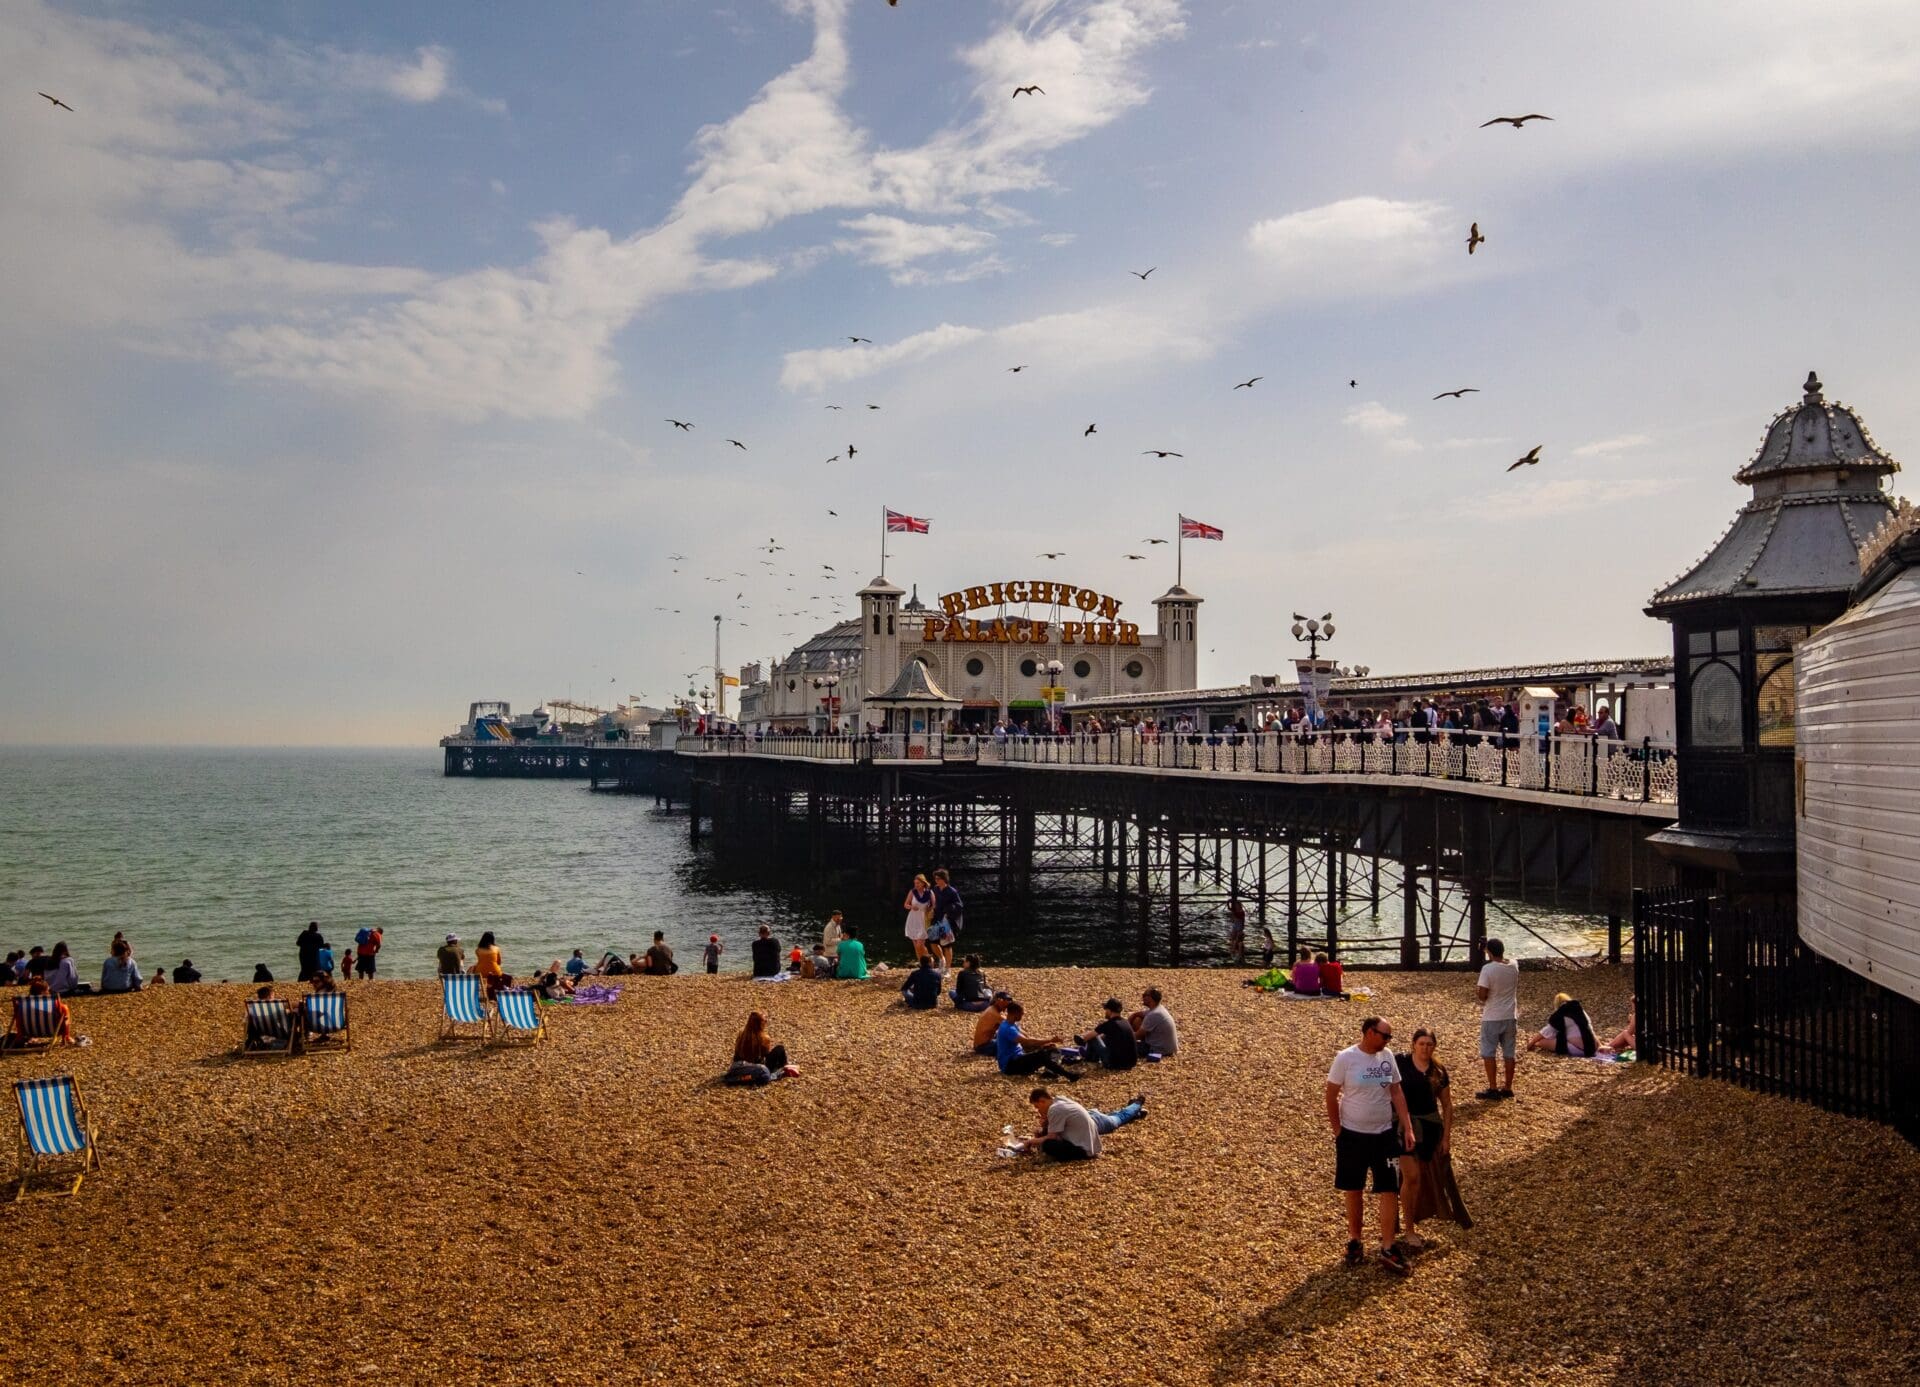 What to do in Brighton | a view of the pier in the sun, with the stoney beach and sunglasses flying overhead